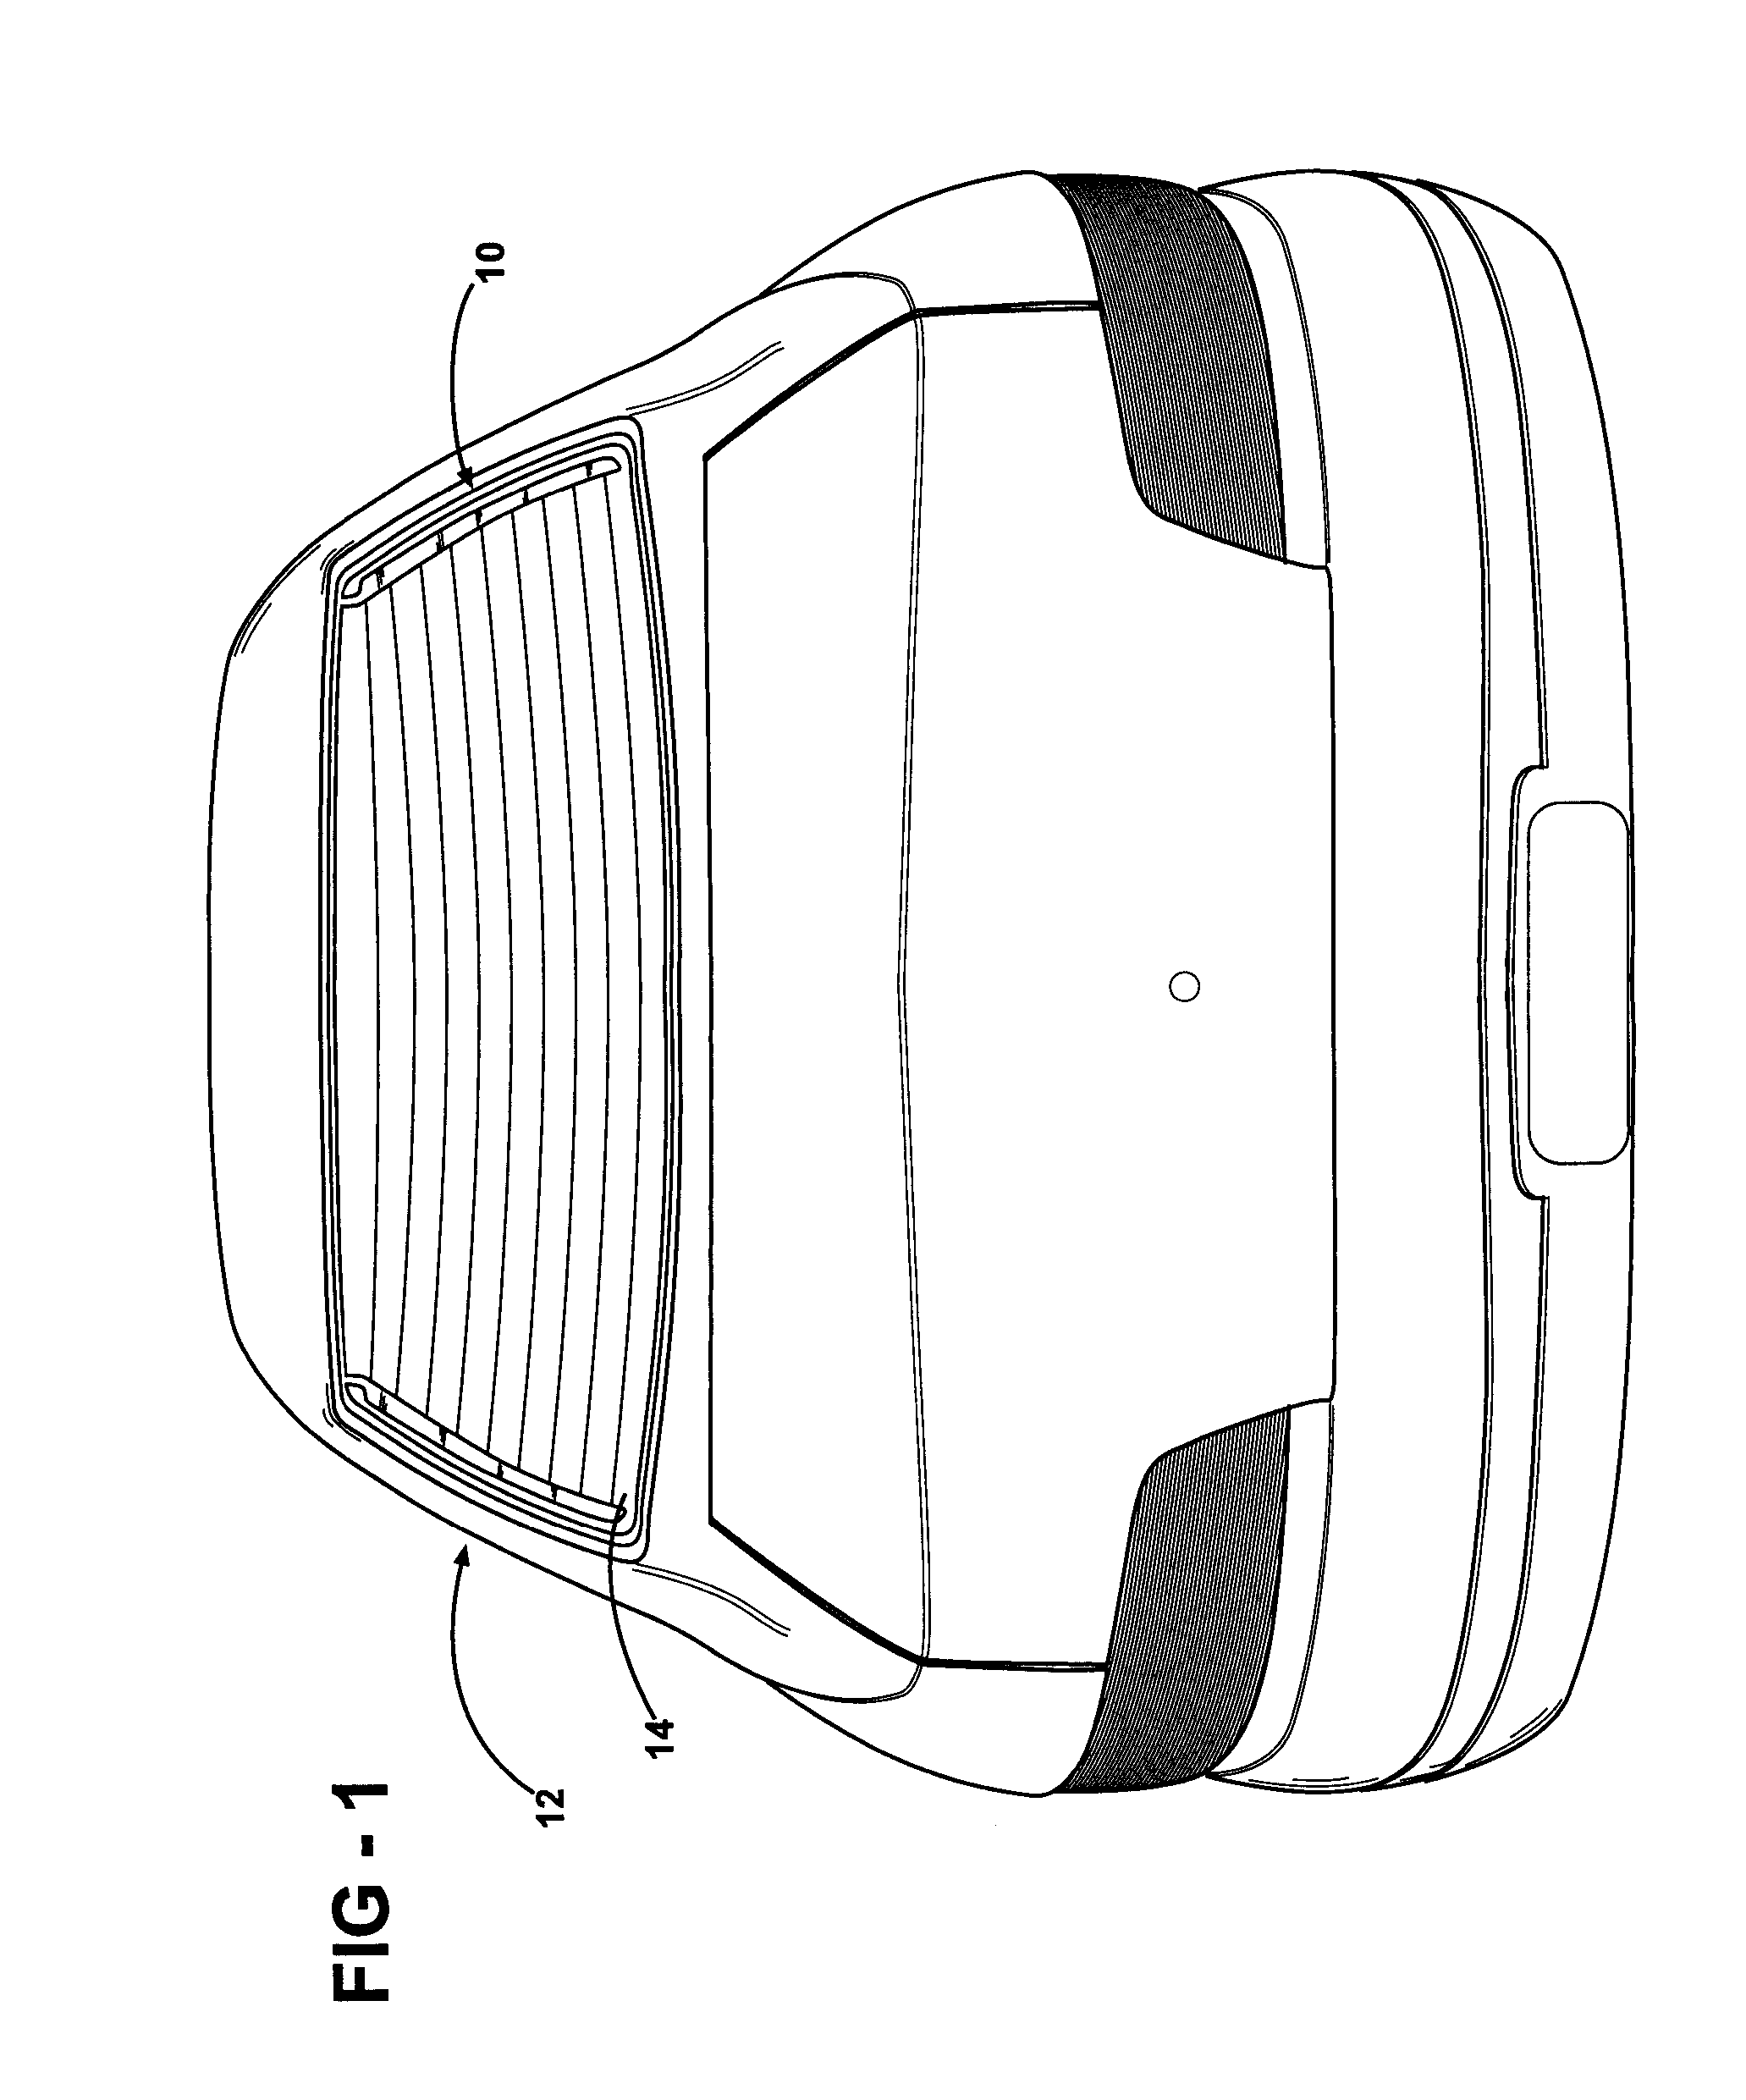 Electrical Connector For A Window Pane Of A Vehicle